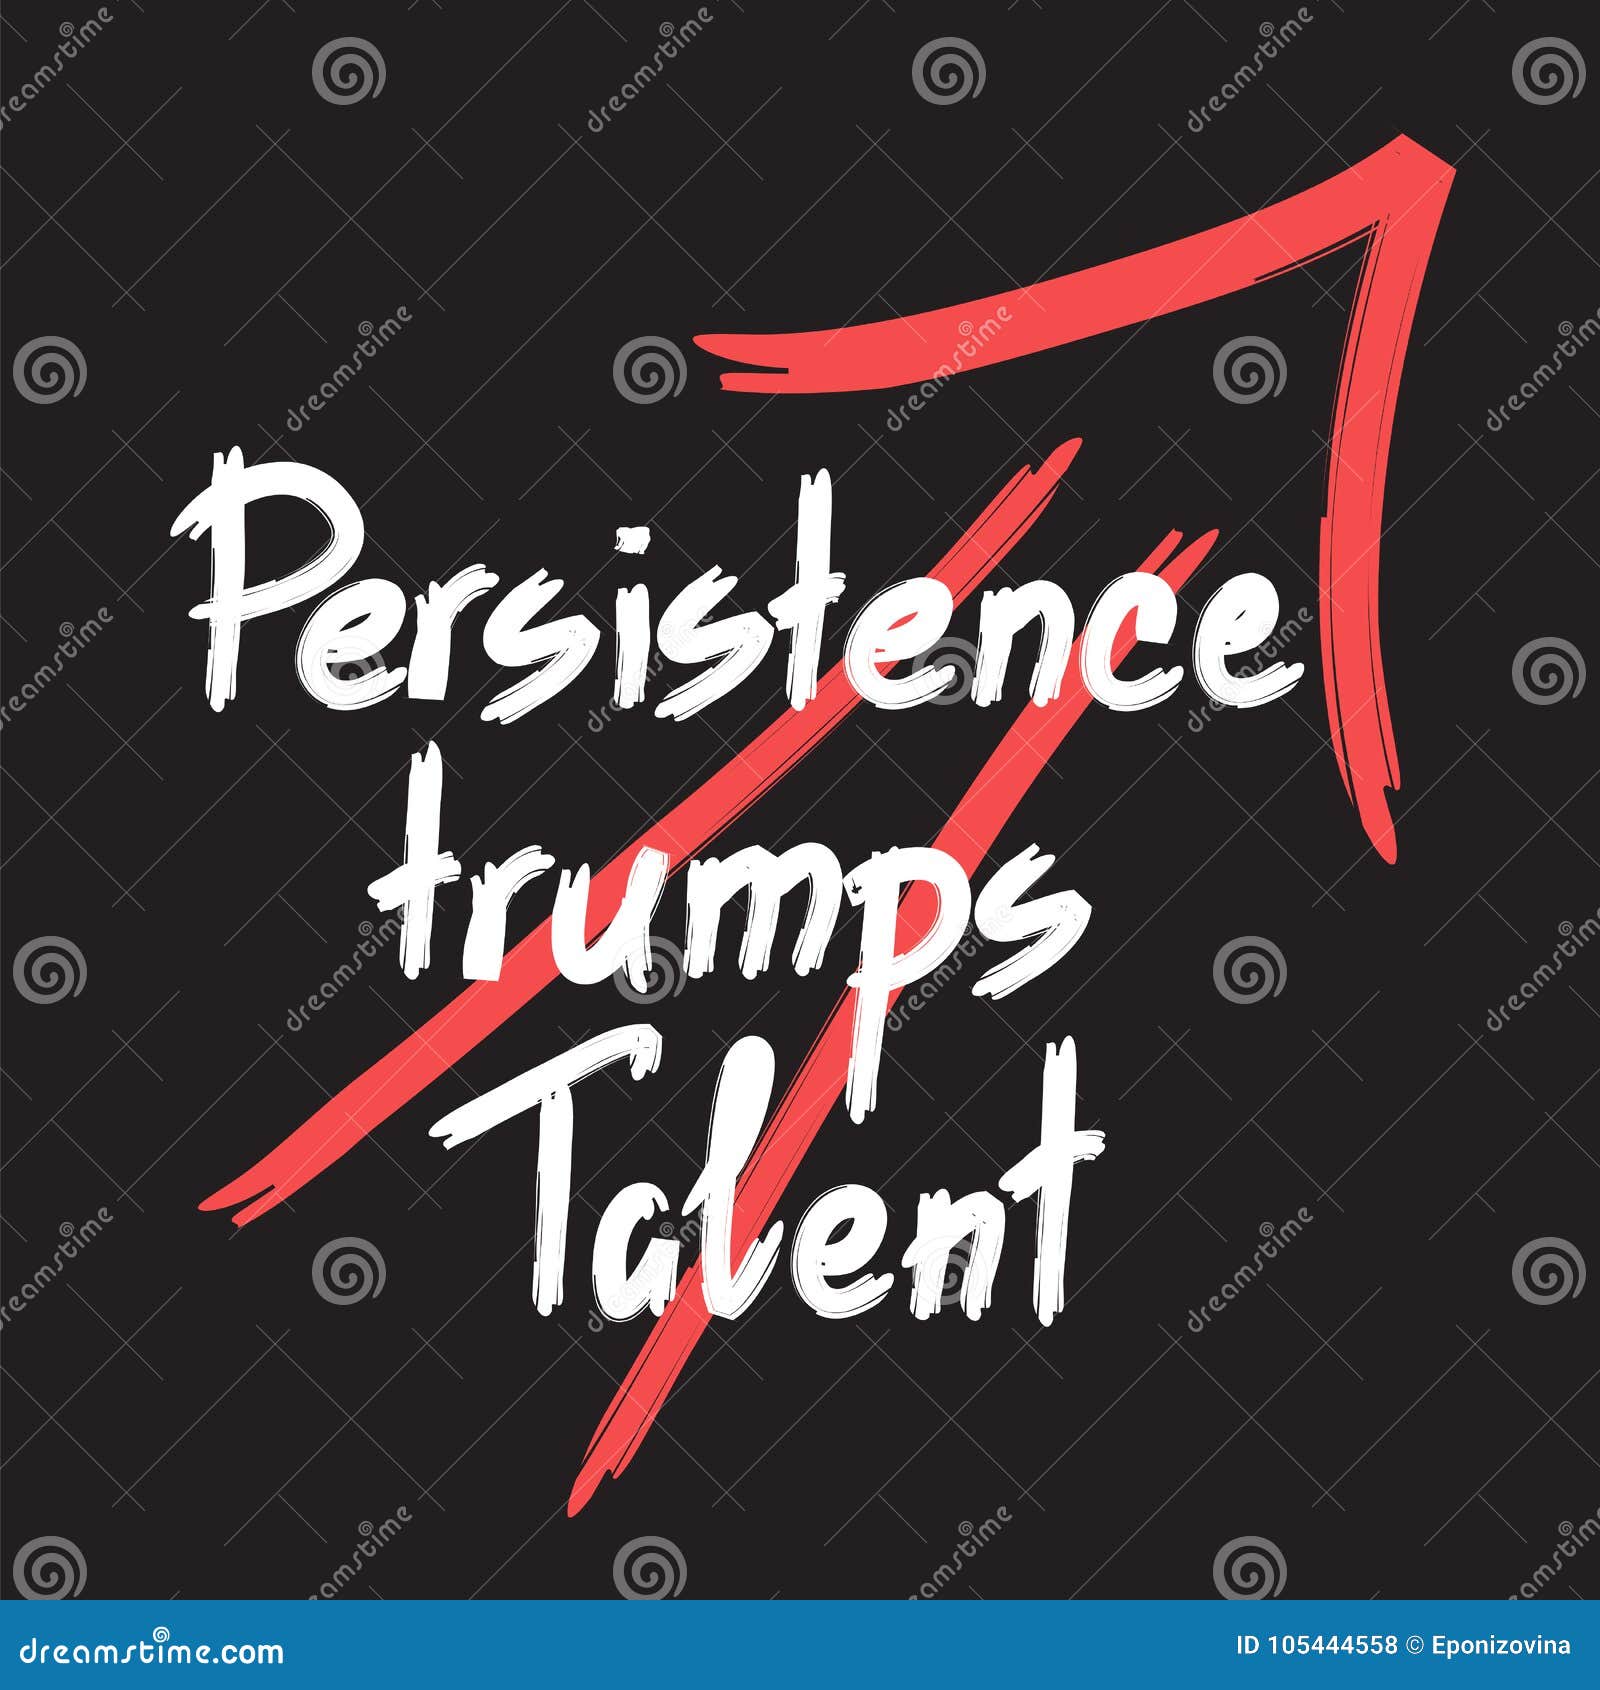 persistence trumps talent quote lettering.